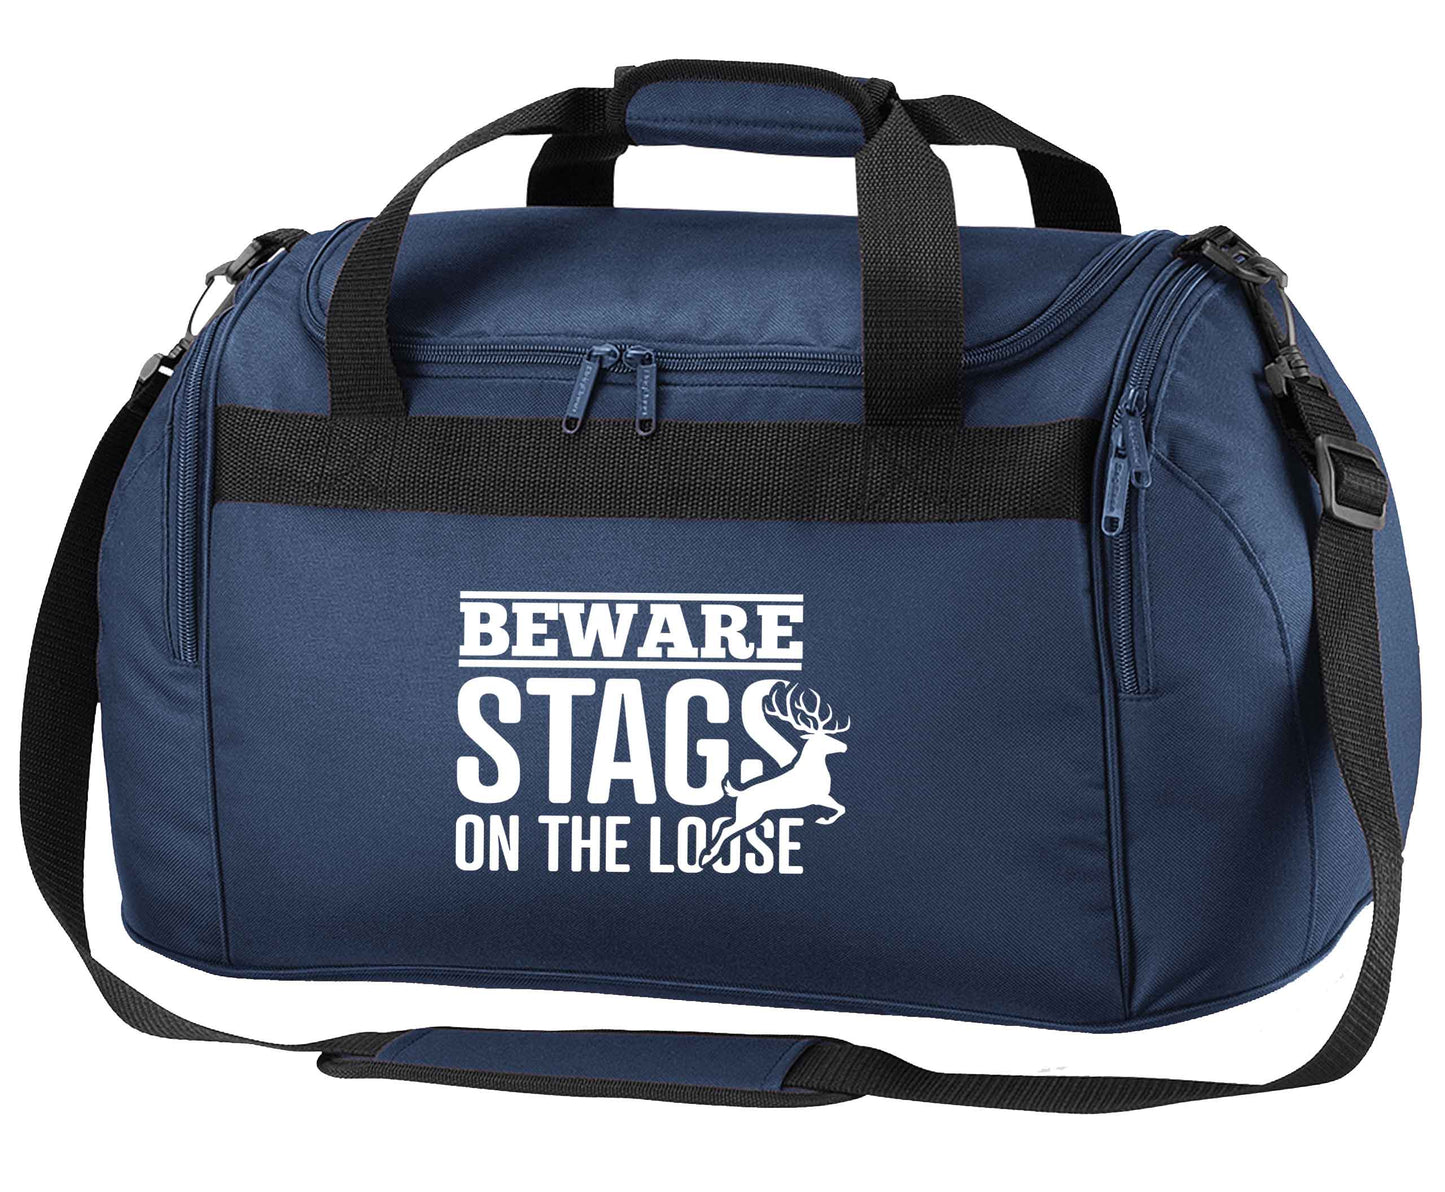 Beware stags on the loose navy holdall / duffel bag